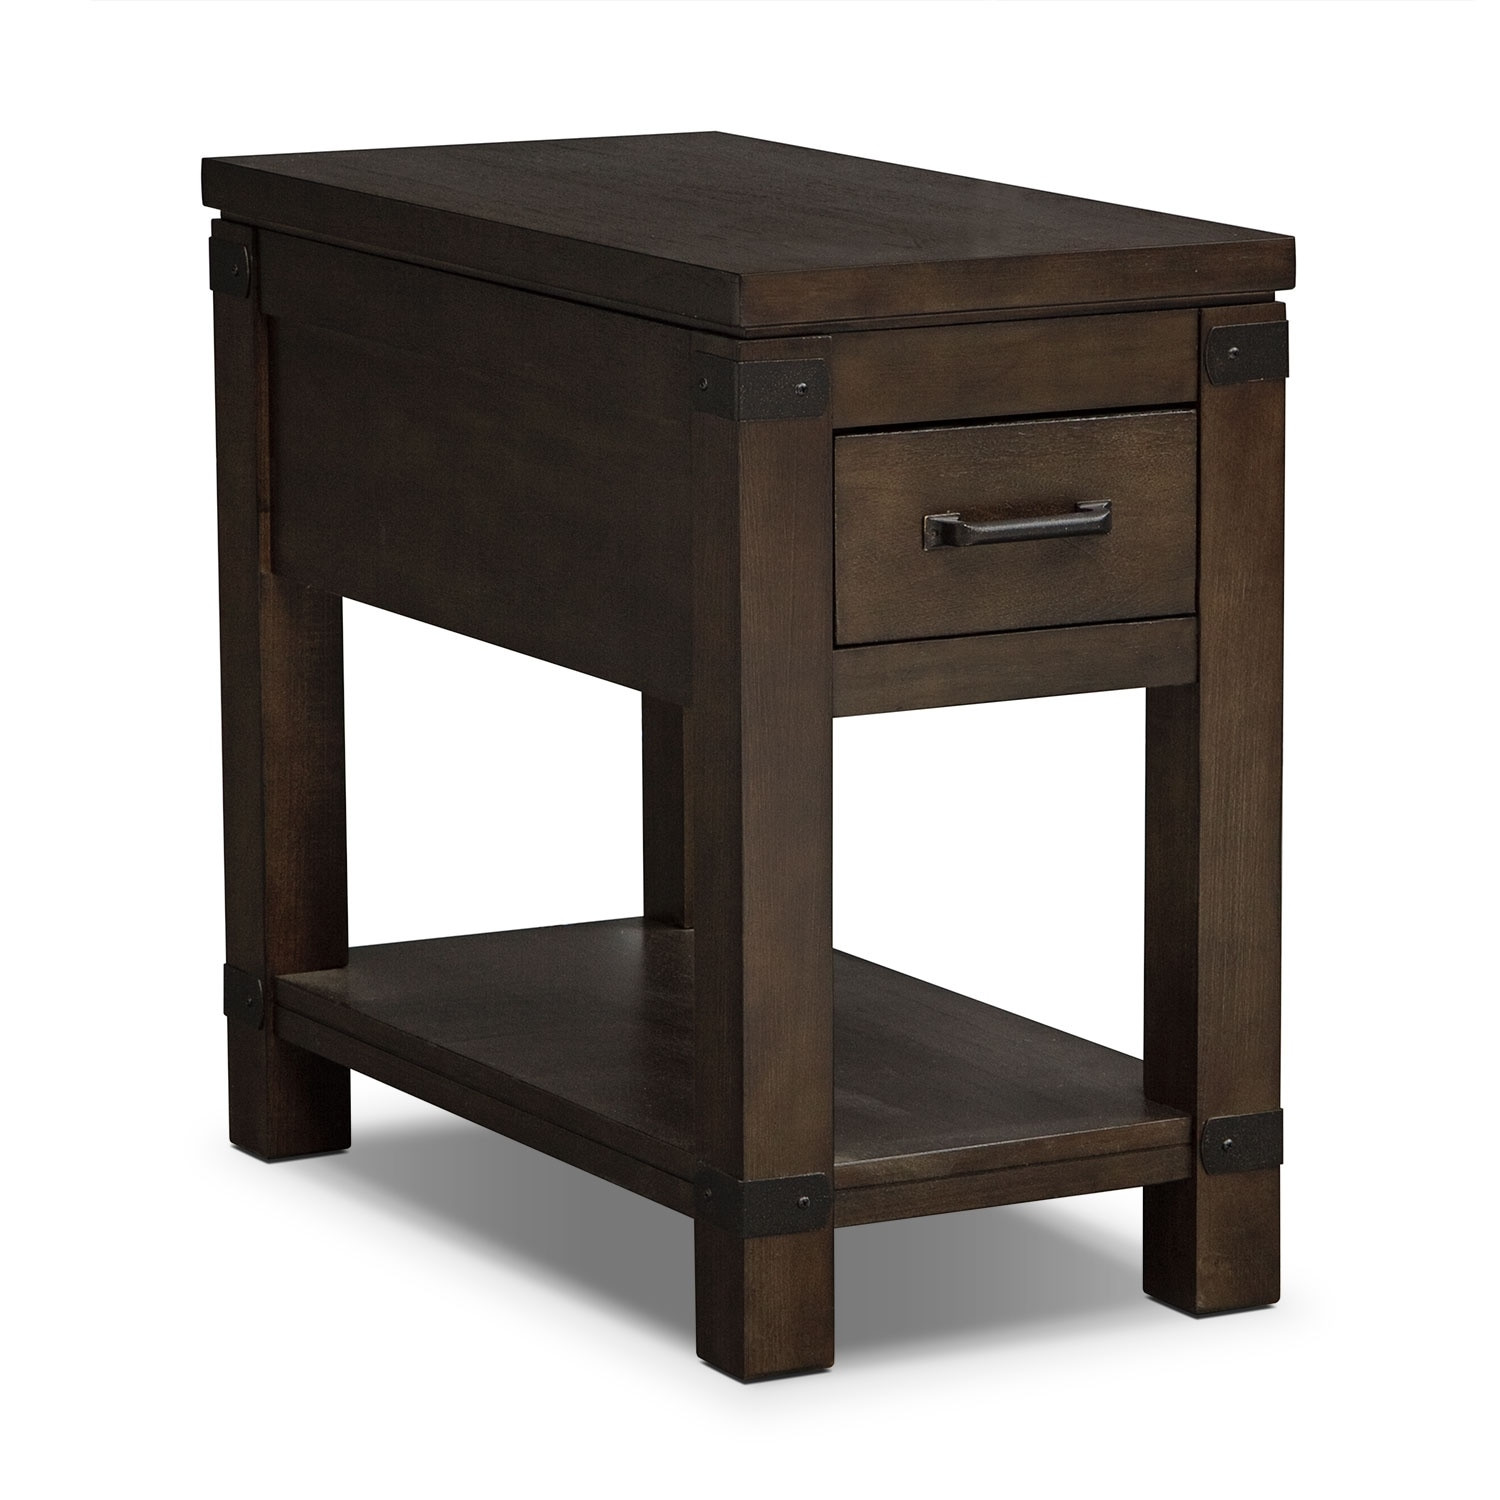 Side Table For Living Room
 Camryn Chairside Table Warm Cocoa